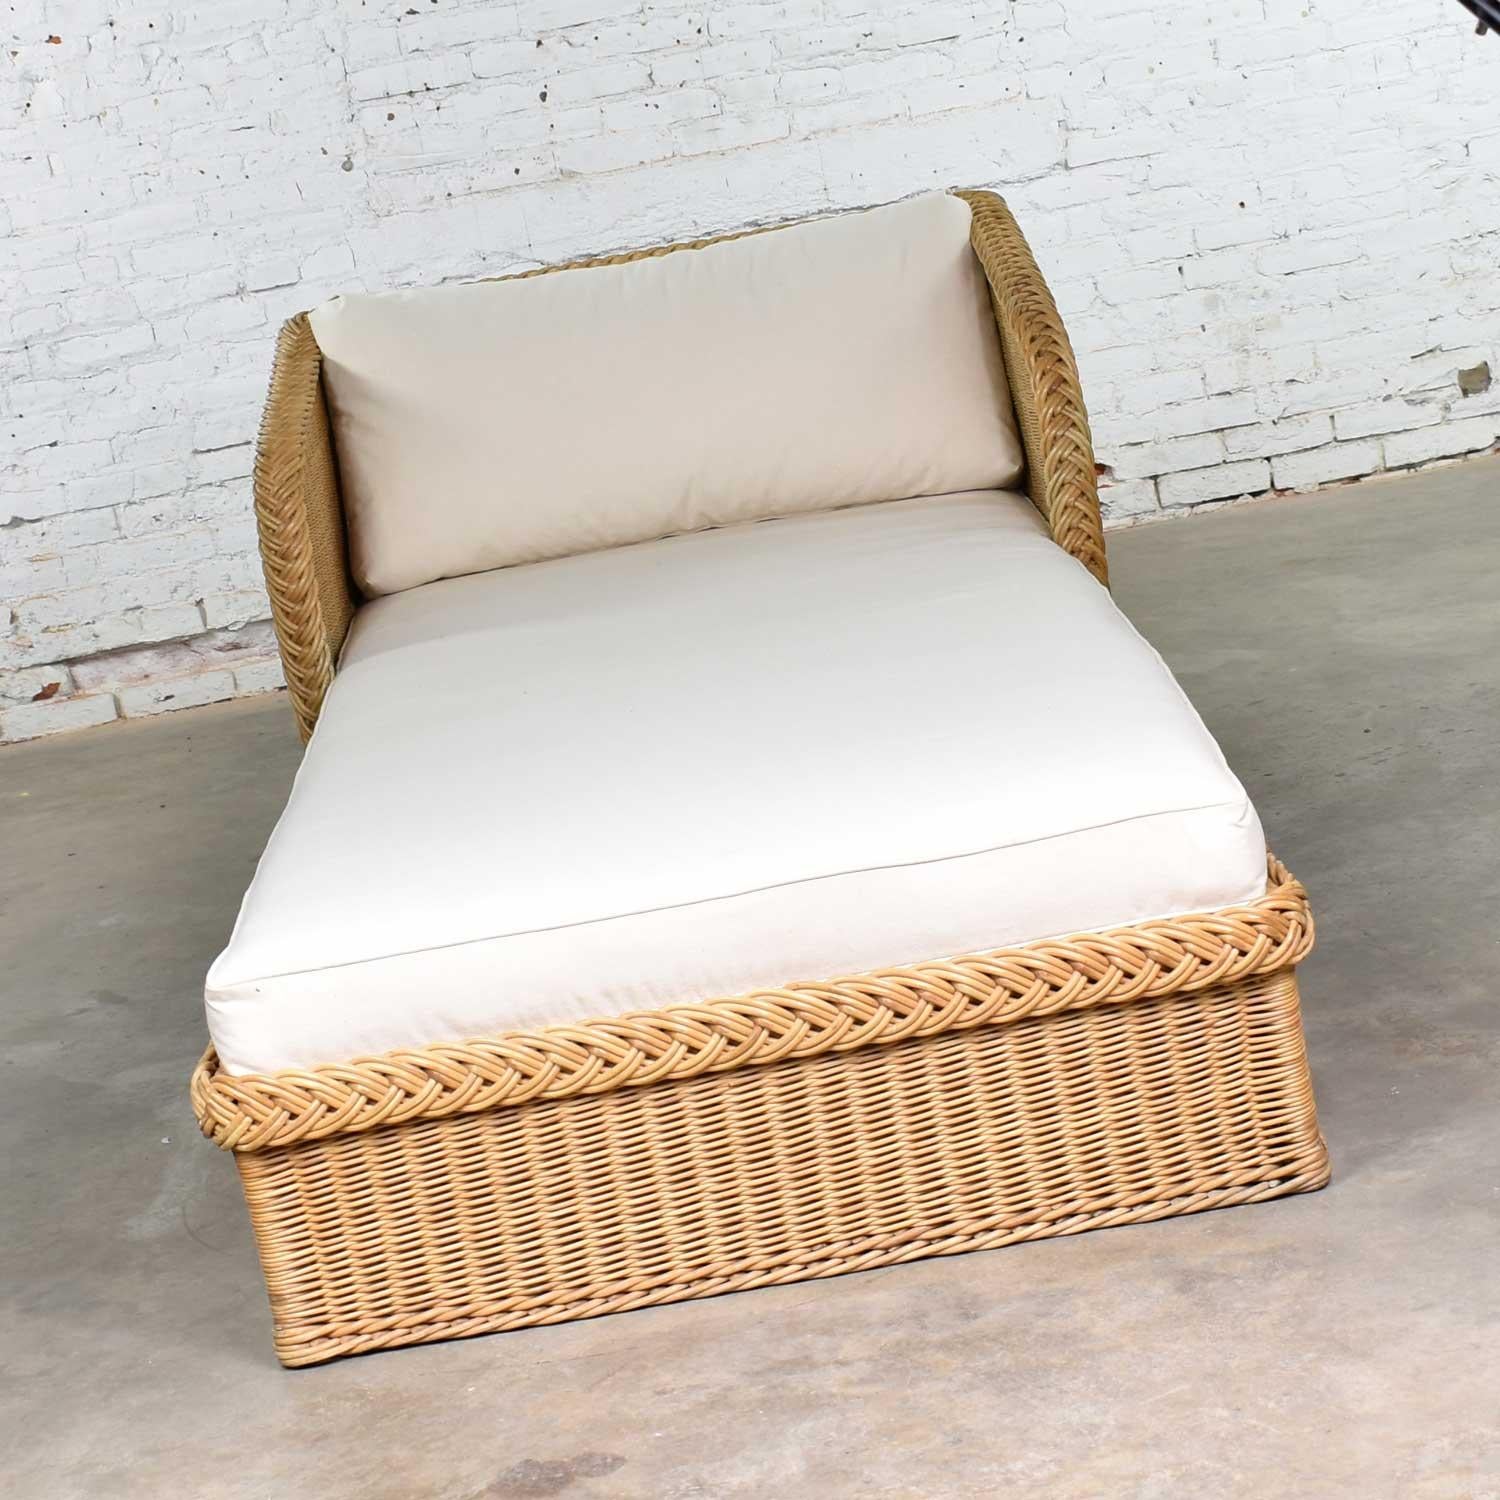 Handsome extra wide wicker chaise W7800 by Bielecky Brothers, Inc. It is in fabulous vintage condition. We have had it recovered in a wonderful white canvas. Please see photos. Circa late 20th century to early 21st century.

Note: There is a